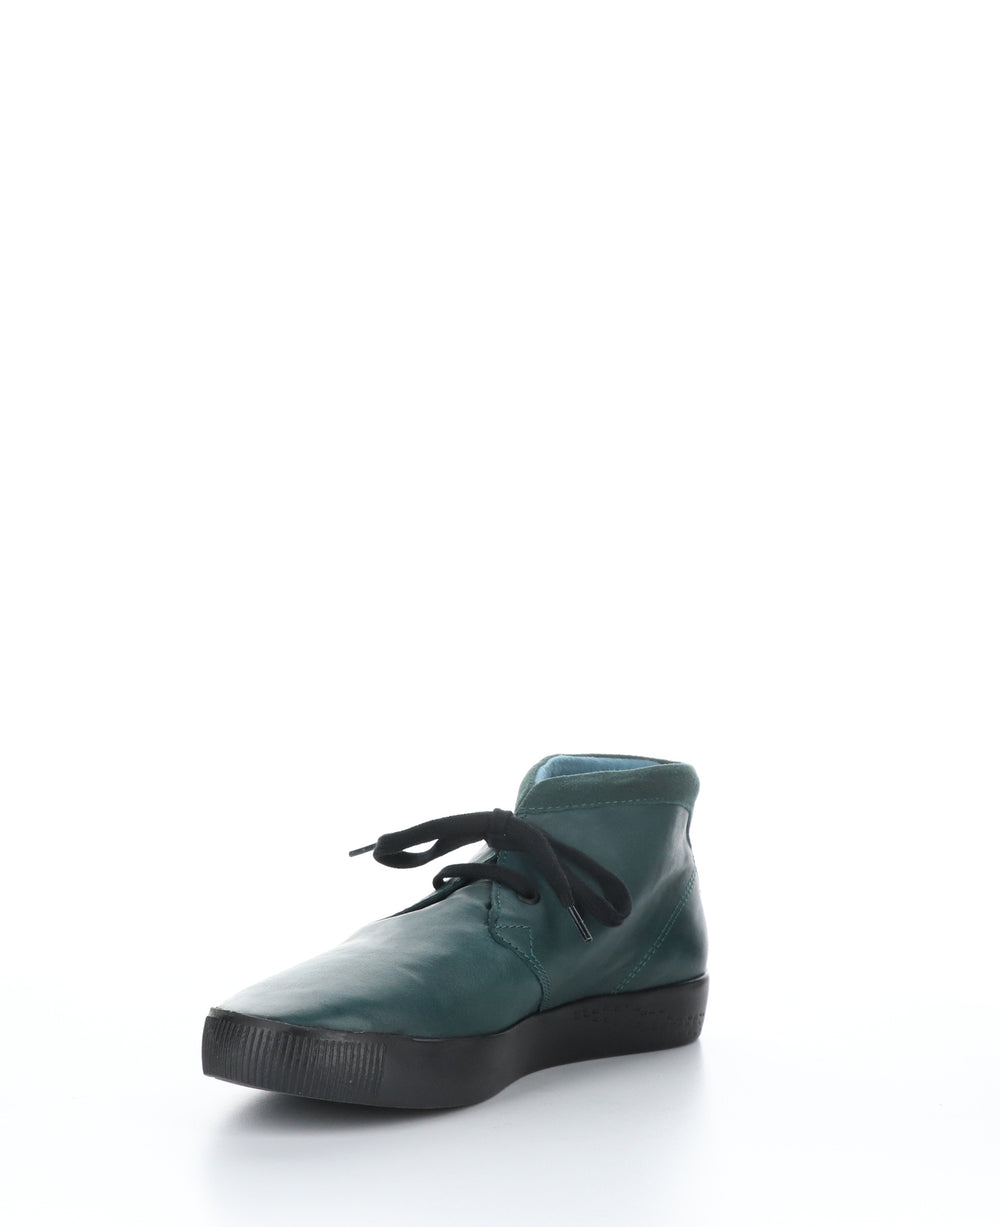 SIAL607SOF Forest Green Round Toe Shoes|SIAL607SOF Chaussures à Bout Rond in Vert